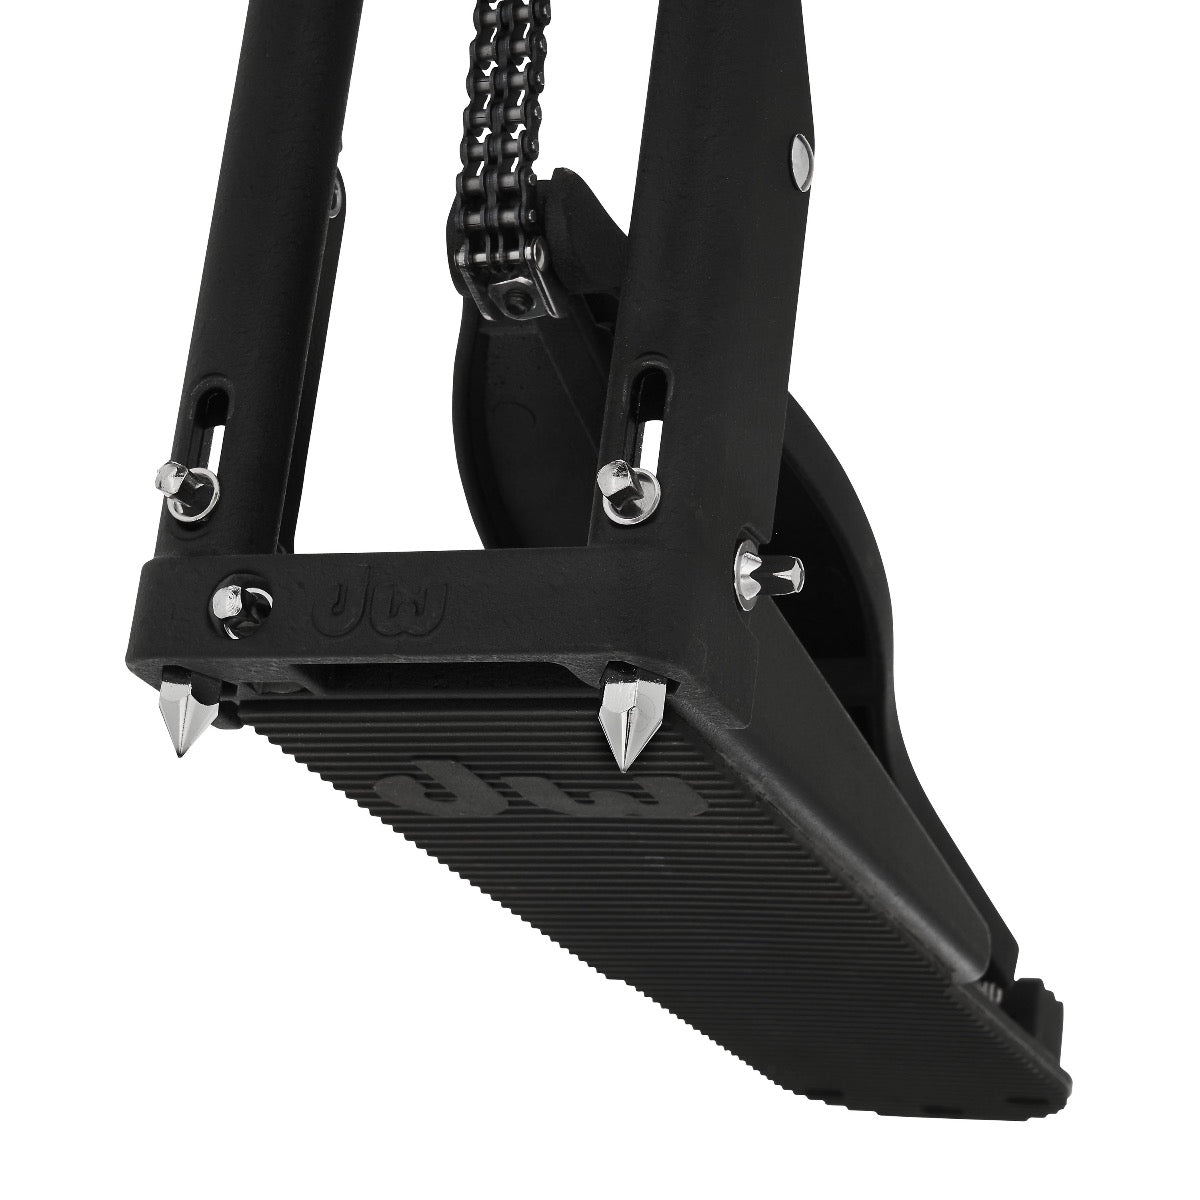 Detail image of Drum Workshop DWCP3500TA 2-Leg Hi-Hat Stand showing footboard bottom and rear